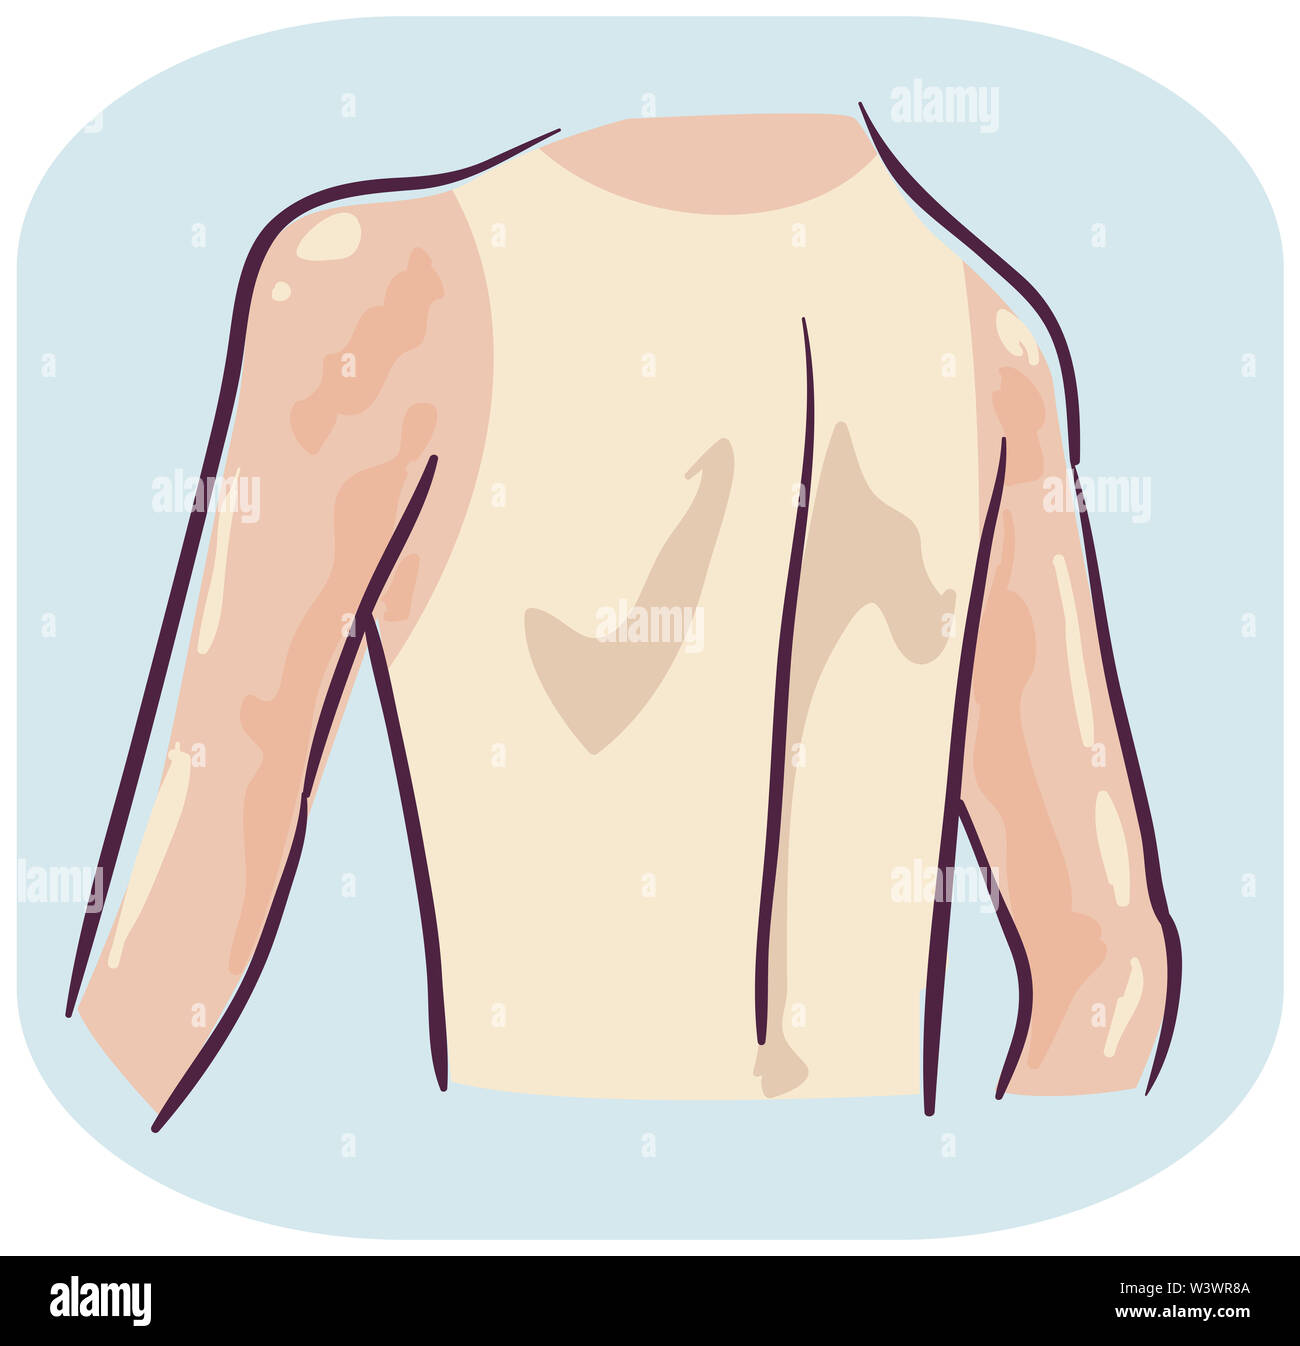 Illustration of a Back of a Man with Sunburn on Arms and Neck Stock Photo